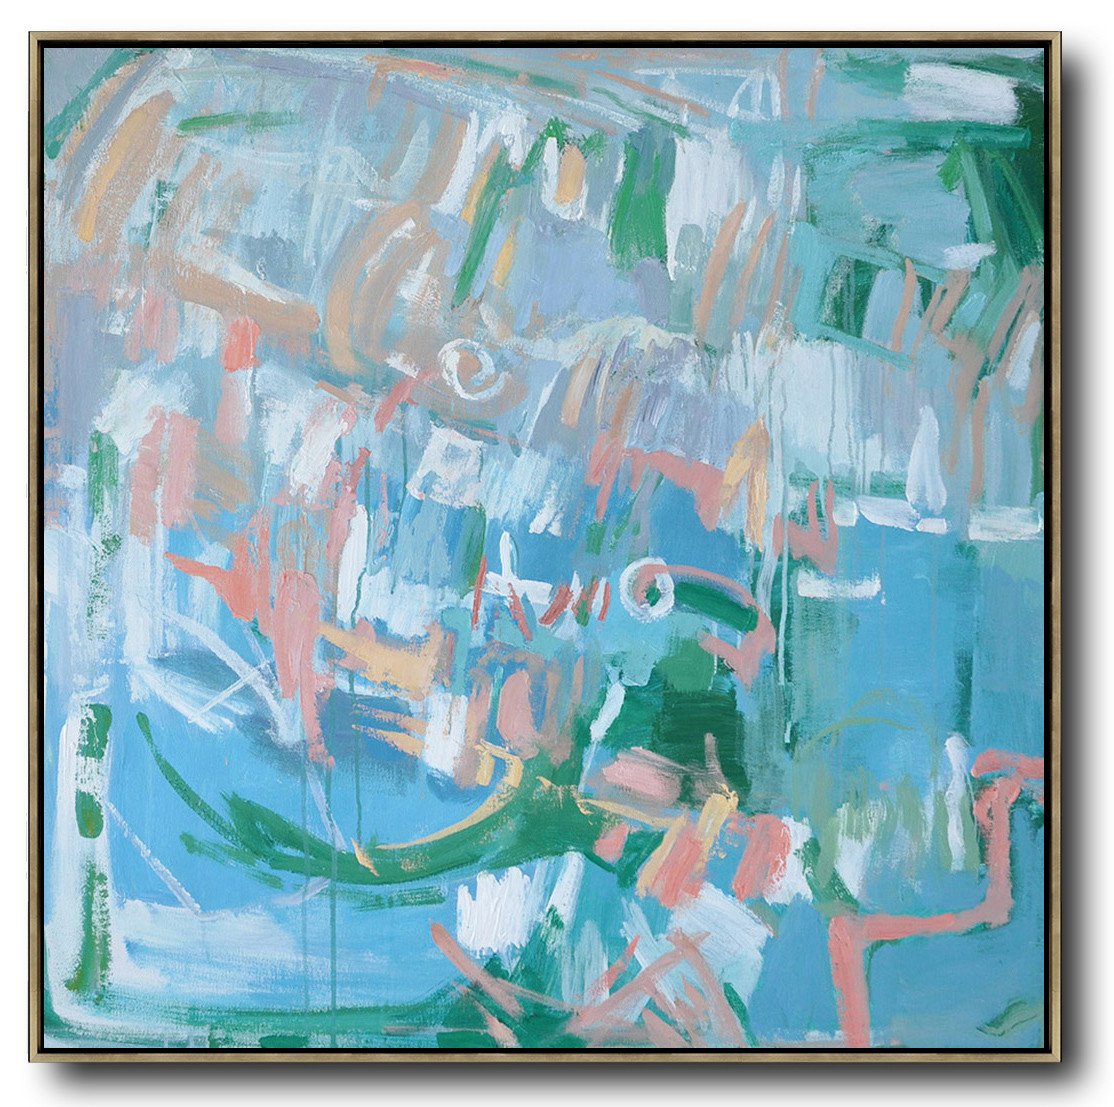 Abstract Painting Extra Large Canvas Art,Oversized Contemporary Oil Painting,Acrylic Painting Large Wall Art,Blue,Green,White,Pink.etc